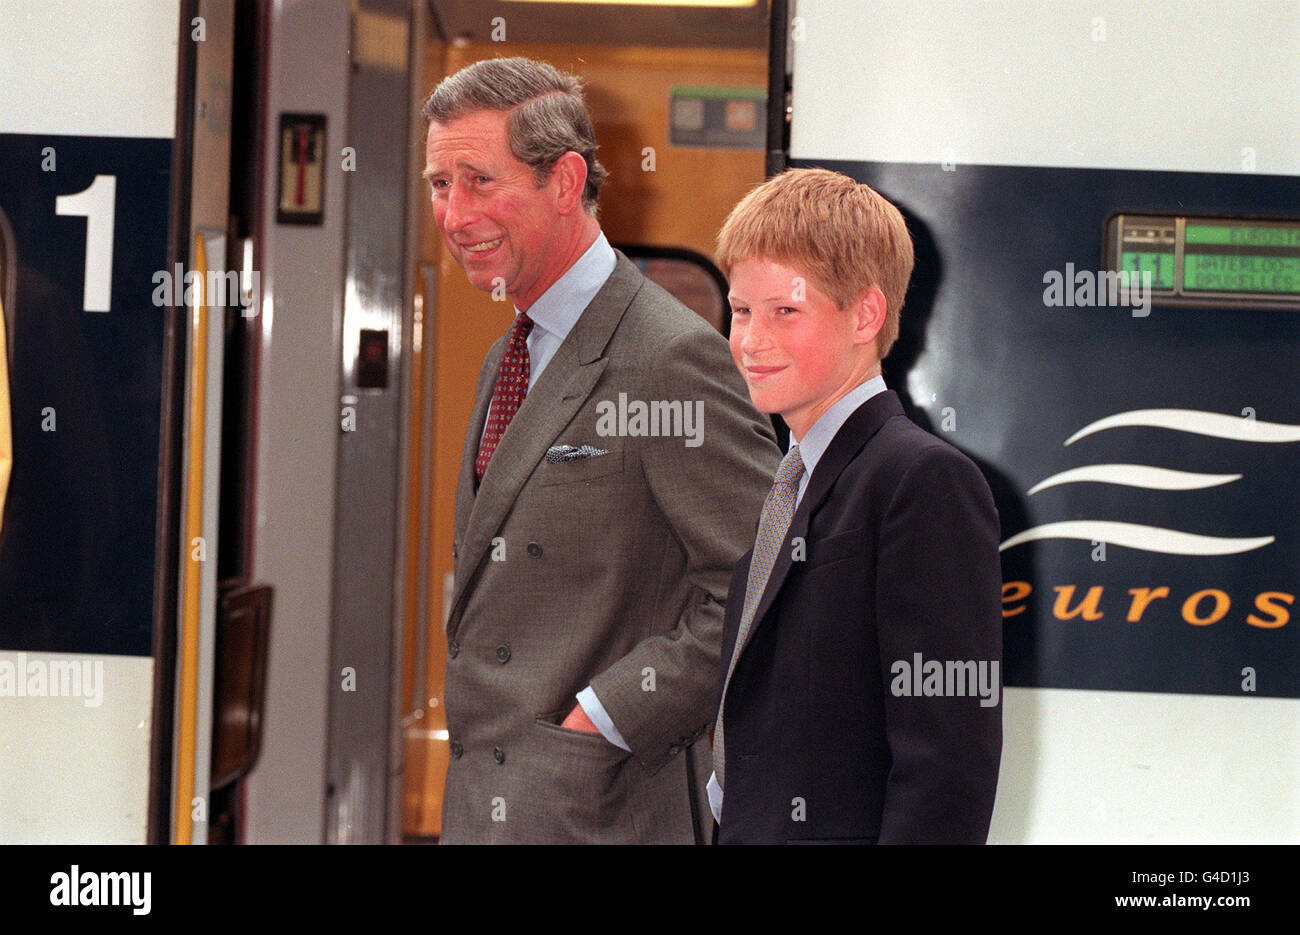 PA NEWS PHOTO 26/6/98 THE PRINCE OF WALES AND SON PRINCE HARRY AT LONDON'S WATERLOO INTERNATIONAL STATION WHERE THEY DEPARTED FOR LENS TO WATCH THE FINAL GROUP G CLASH BETWEEN ENGLAND AND COLOMBIA Stock Photo